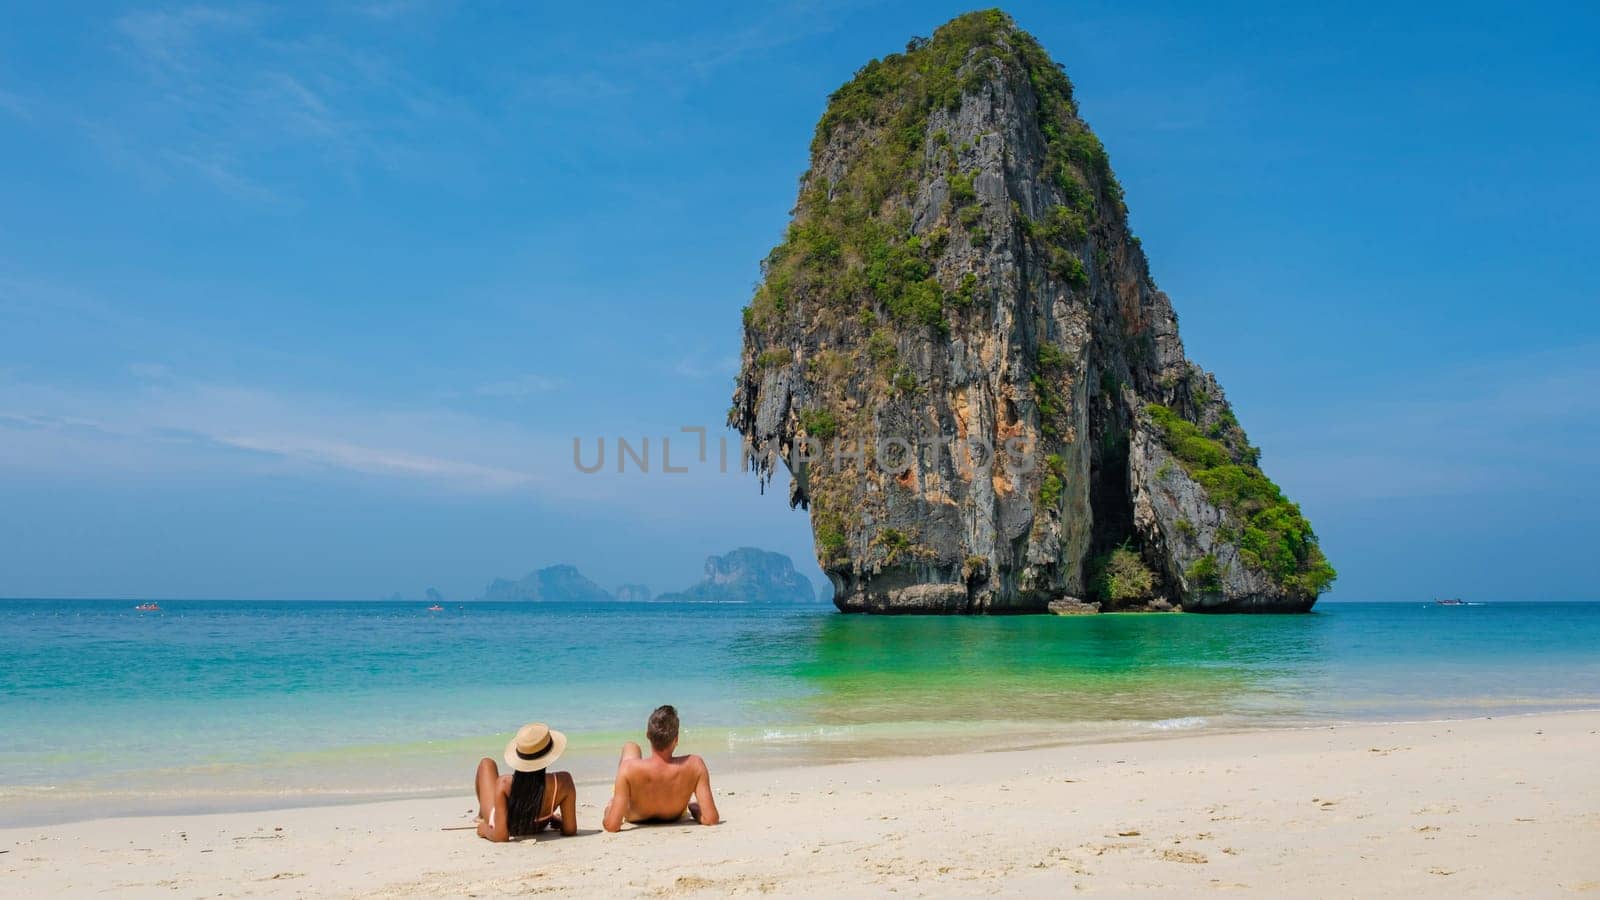 Two individuals are relaxing on a sandy beach with a majestic rock formation in the background, overlooking the vast ocean with clear blue skies and a few clouds above Couple vacation Krabi Thailand